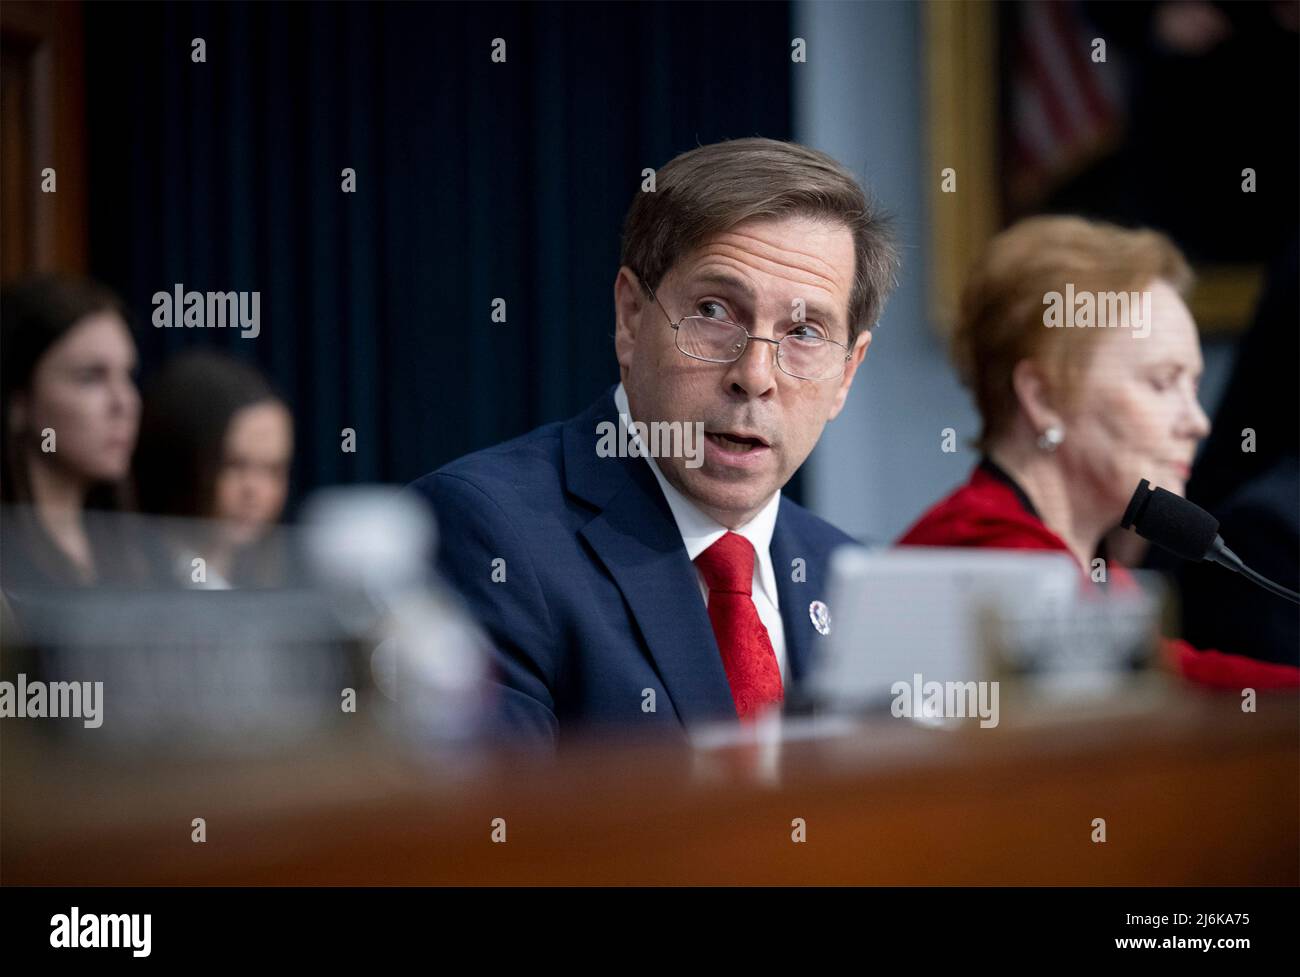 Washington, United States of America. 27 April, 2022. U.S Rep. Chuck Fleischmann of Tennessee questions Homeland Security Secretary Alejandro Mayorkas, during a hearing at the House Committee on Appropriations, on Capitol Hill April 28, 2022 in Washington, D.C.  Credit: Benjamin Applebaum/DHS Photo/Alamy Live News Stock Photo